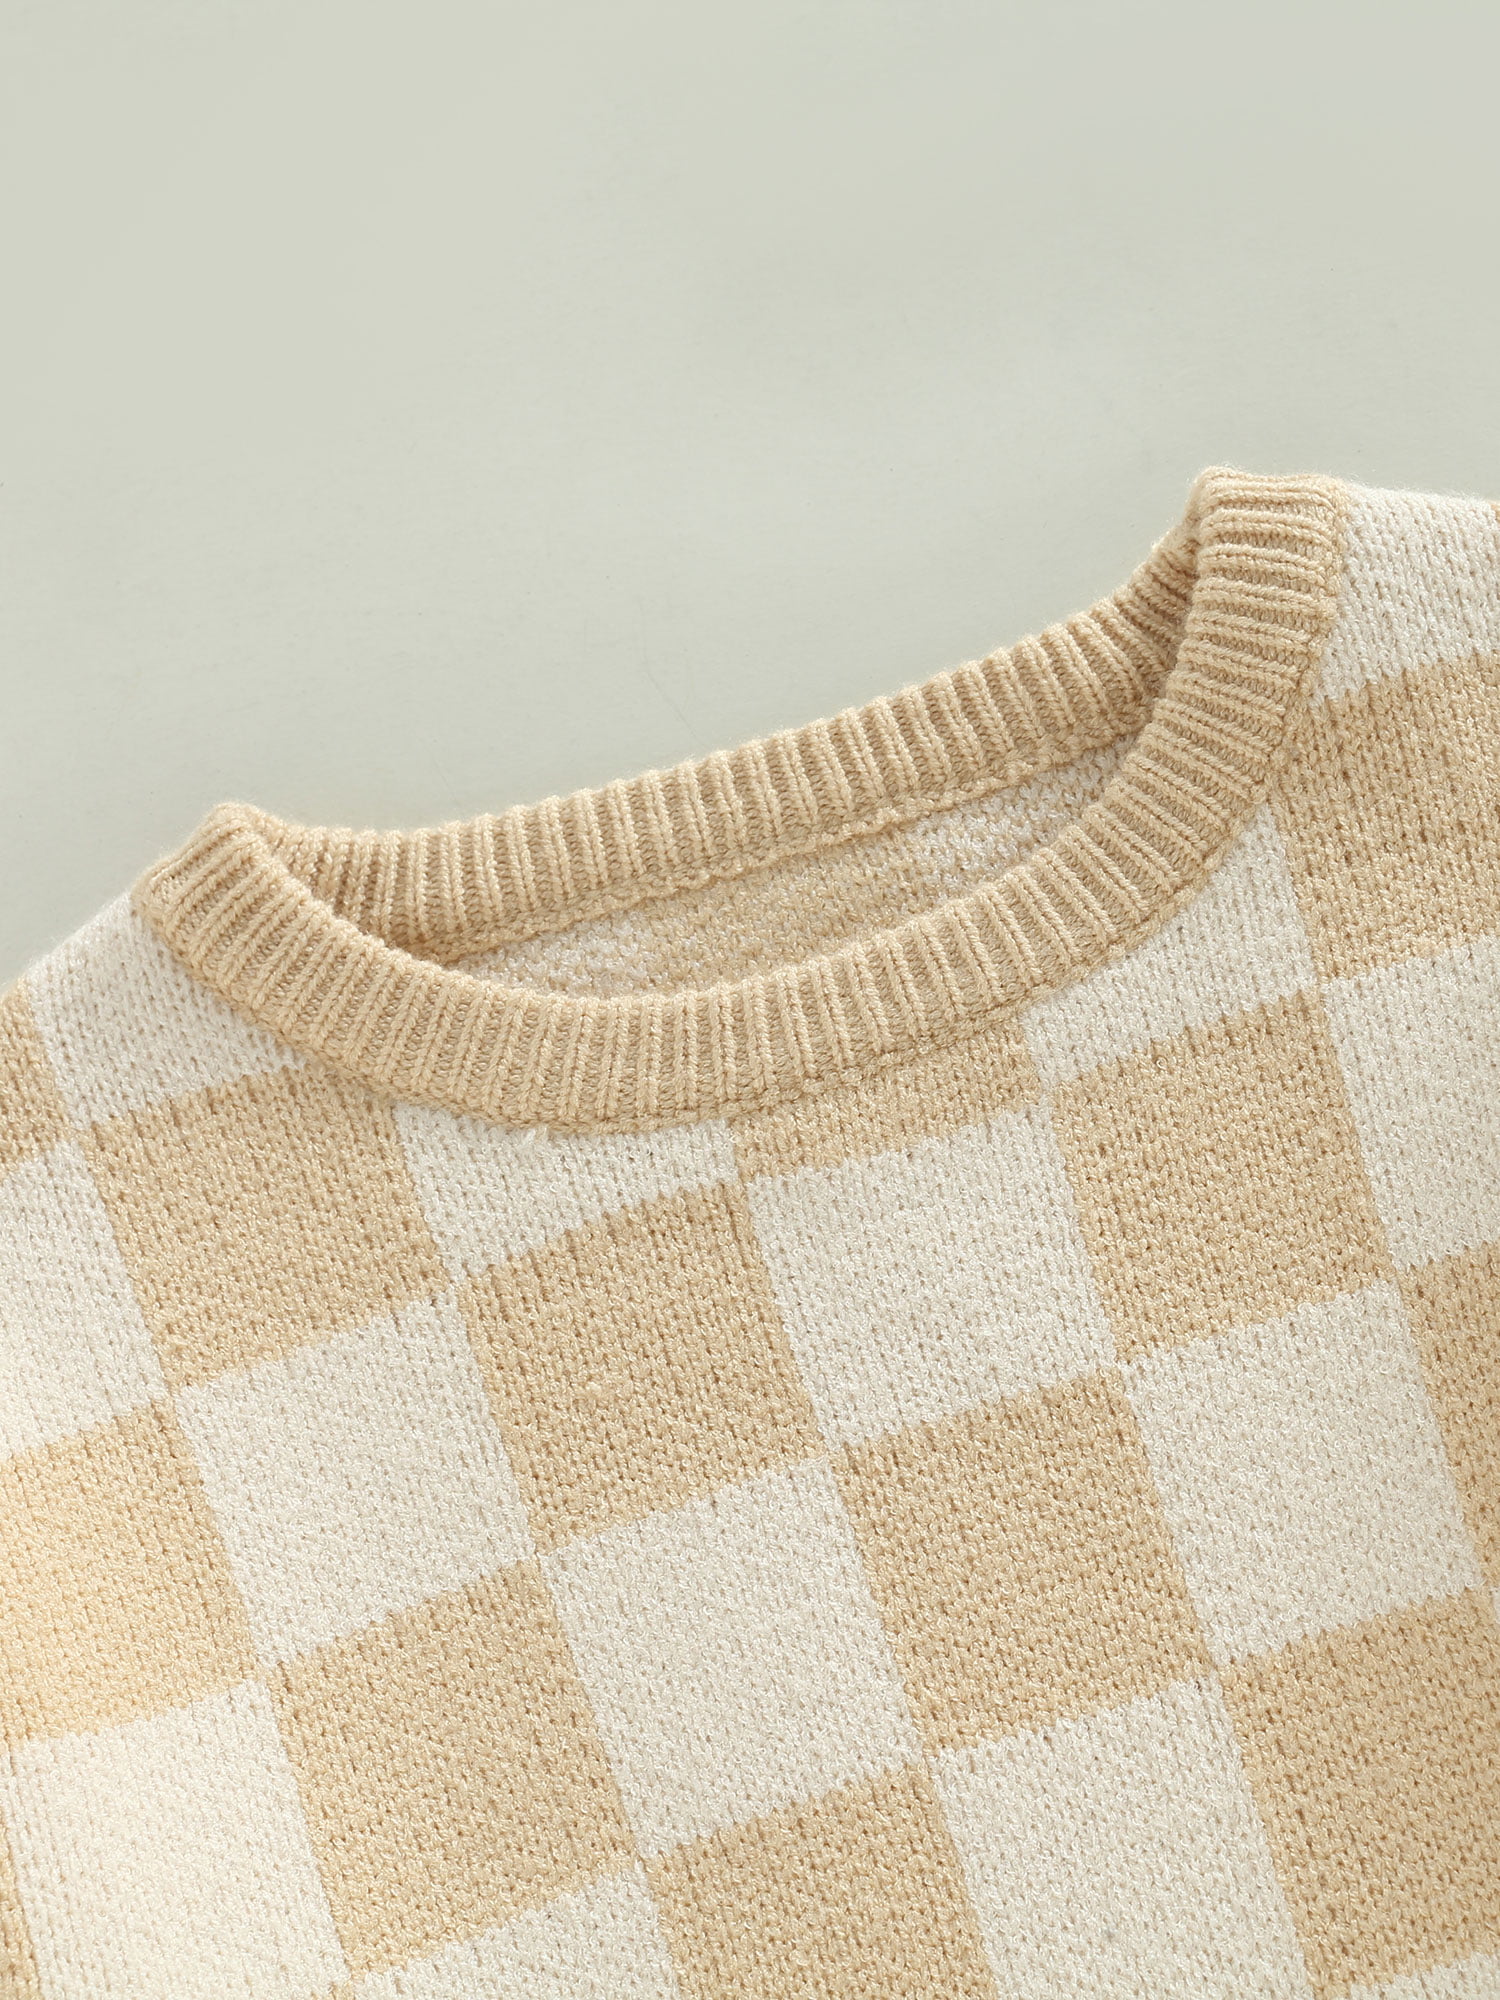 Inevnen Toddler Baby Girl Boy Cardigan Knit Sweater Long Sleeve Crewneck  Button Up Checkerboard Knitwear Fall Winter Clothes 